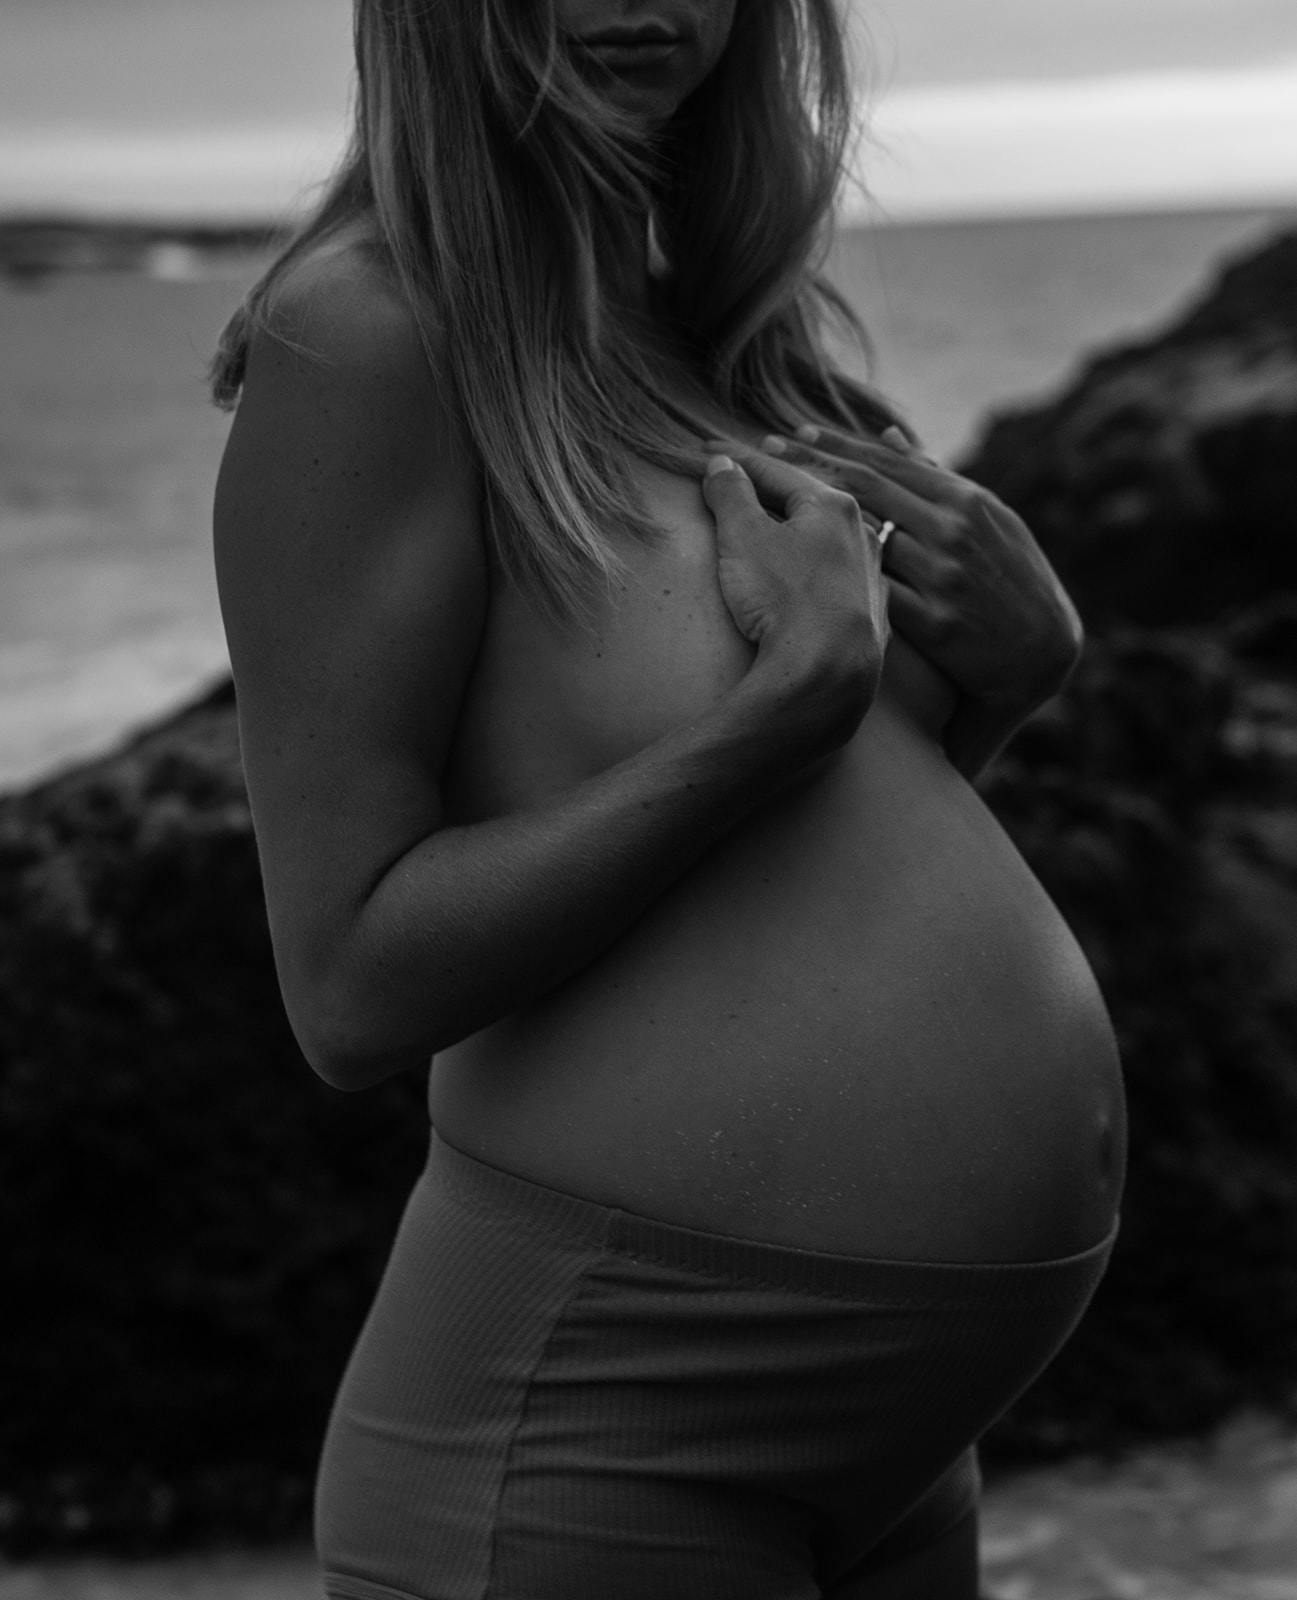 Kauai maternity photography for unique and personalized maternity sessions